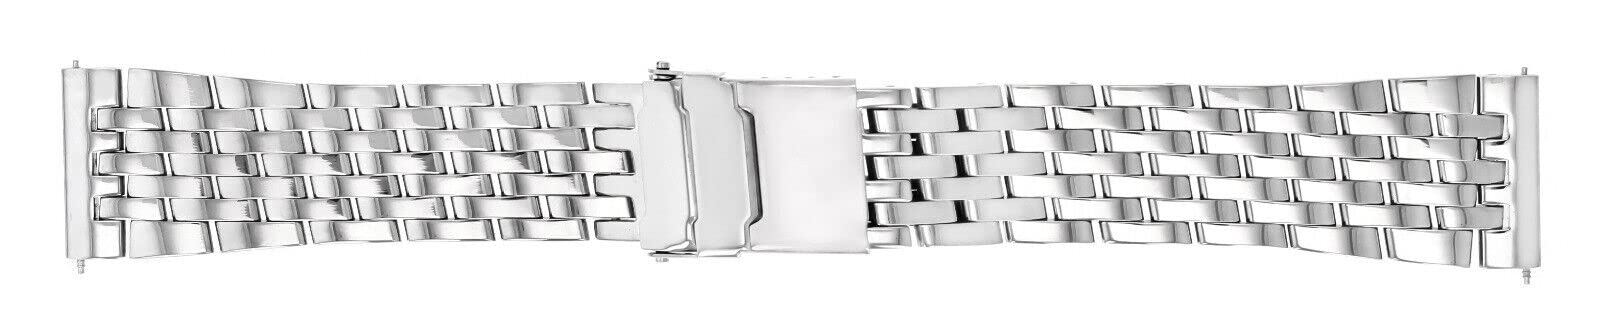 Ewatchparts 22MM WATCH BAND BRACELET COMPATIBLE WITH BREITLING NAVITIMER A13322 7 LINK STAINLESS S SHINY